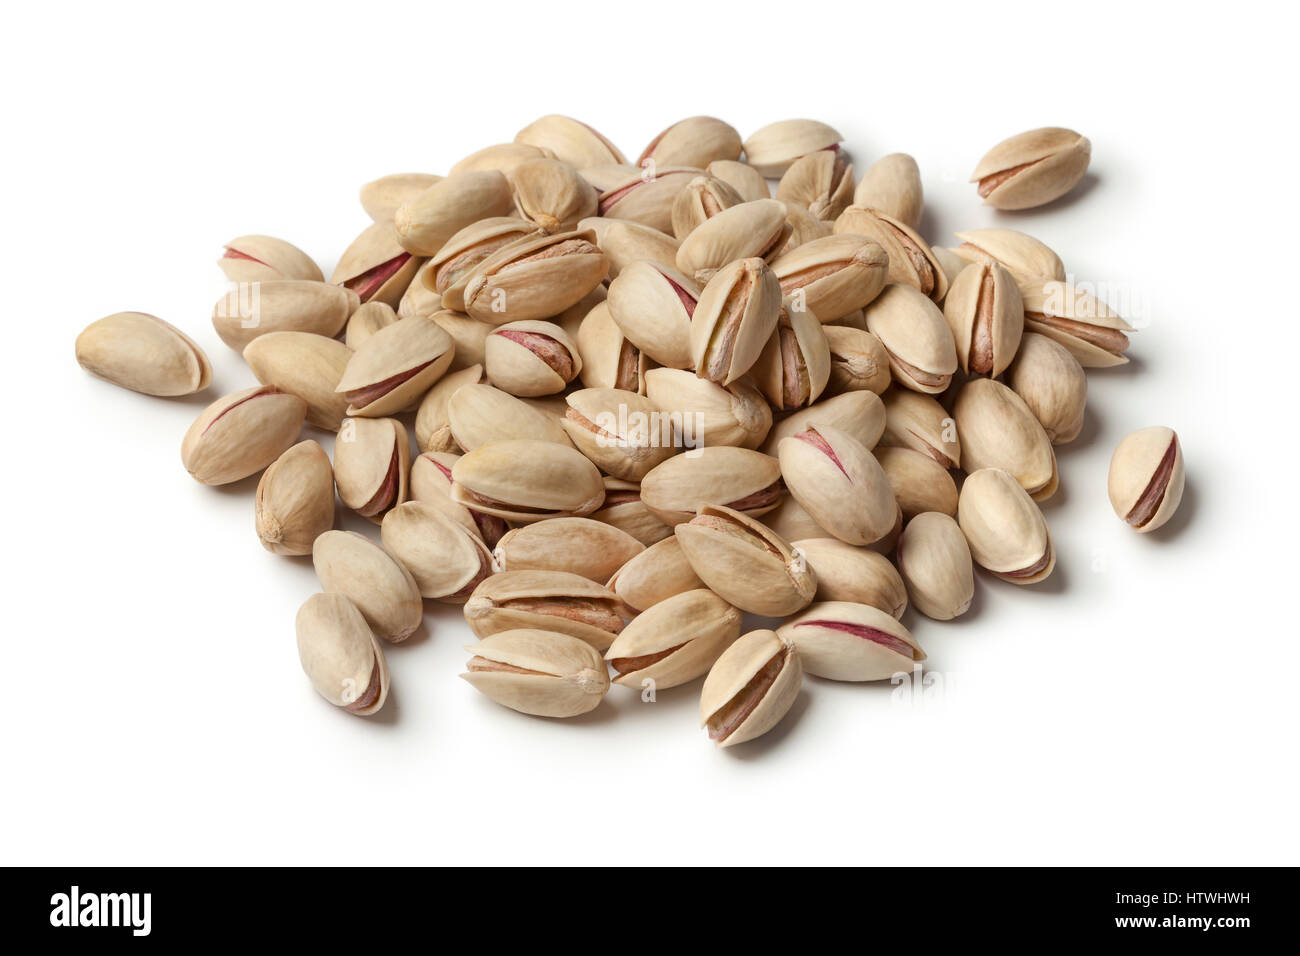 Heap of unshelled pistachio nuts on white background Stock Photo